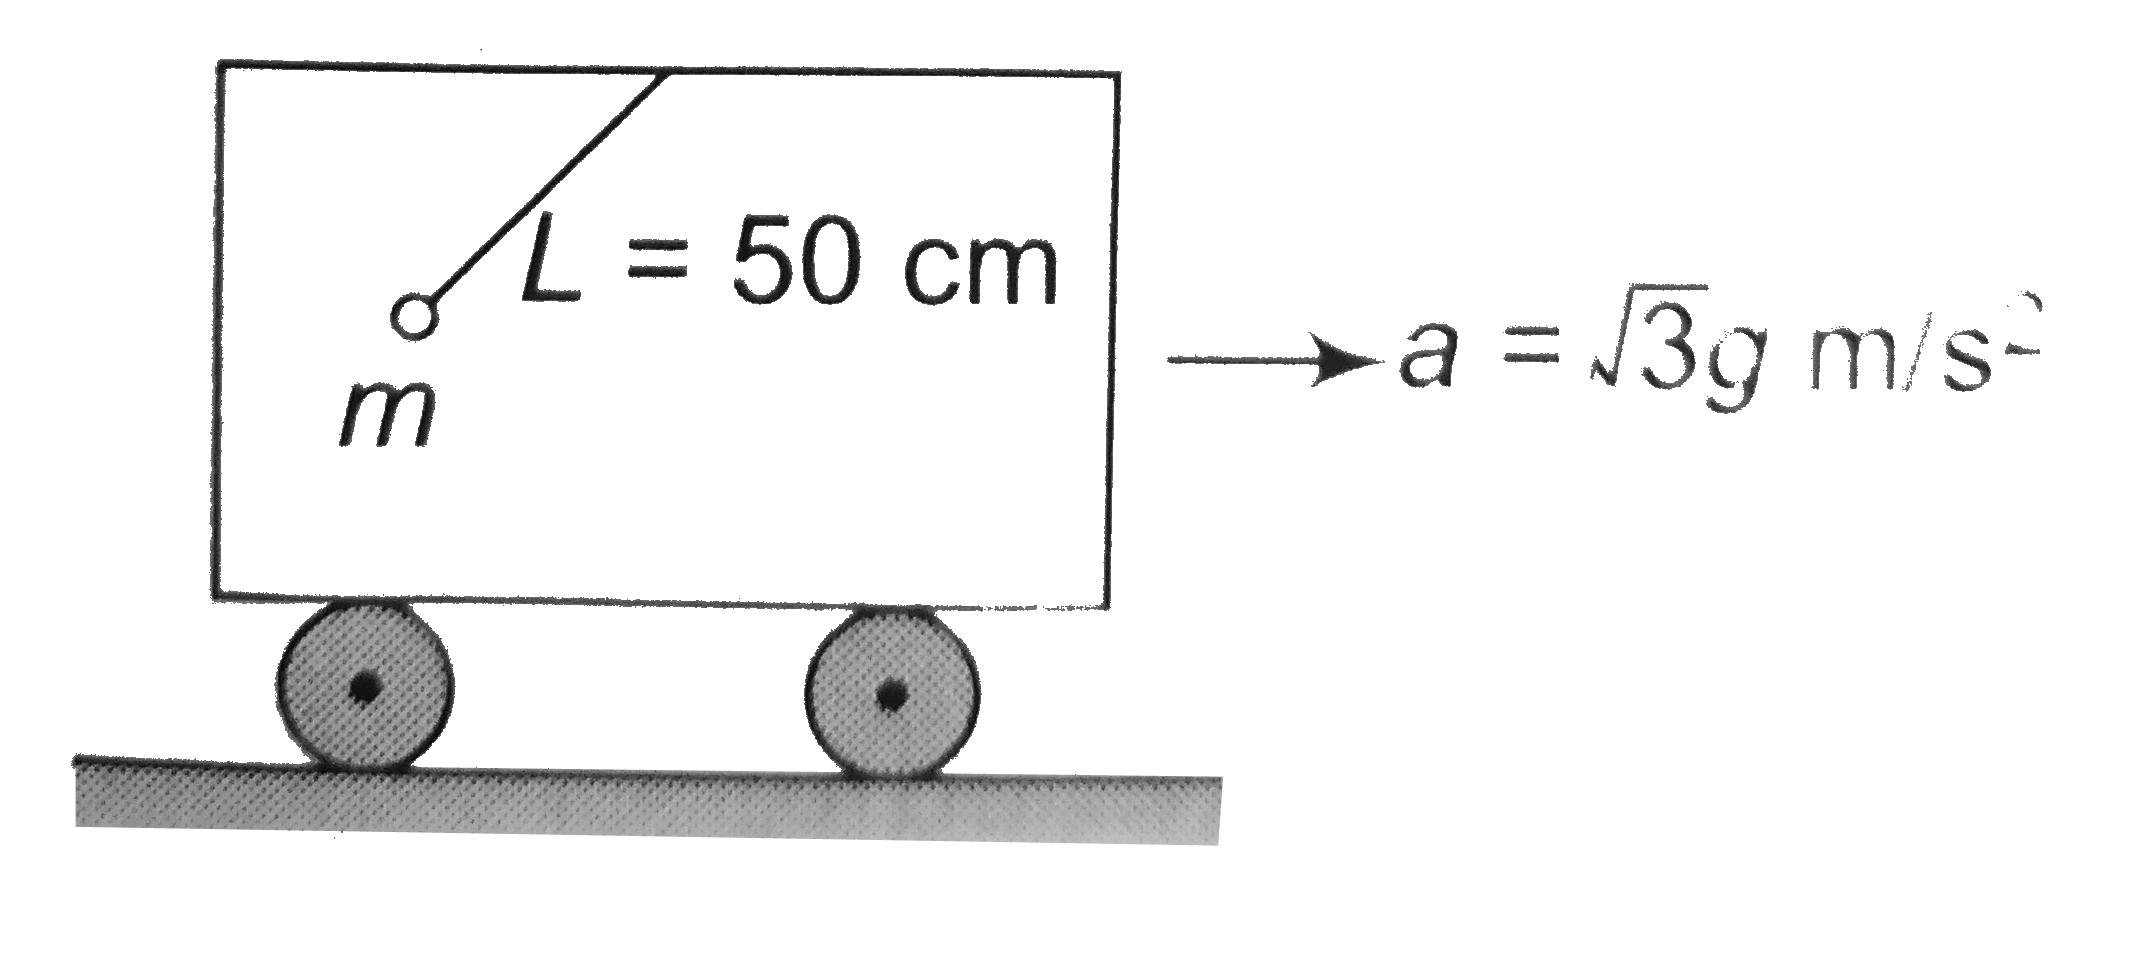 A simple pendulum 50cm long is suspended from the roof of a acceleration in the horizontal direction with constant acceleration sqrt(3) g m//s^(-1). The period of small oscillations of the pendulum about its equilibrium position is (g = pi^(2) m//s^(2)) ltbRgt